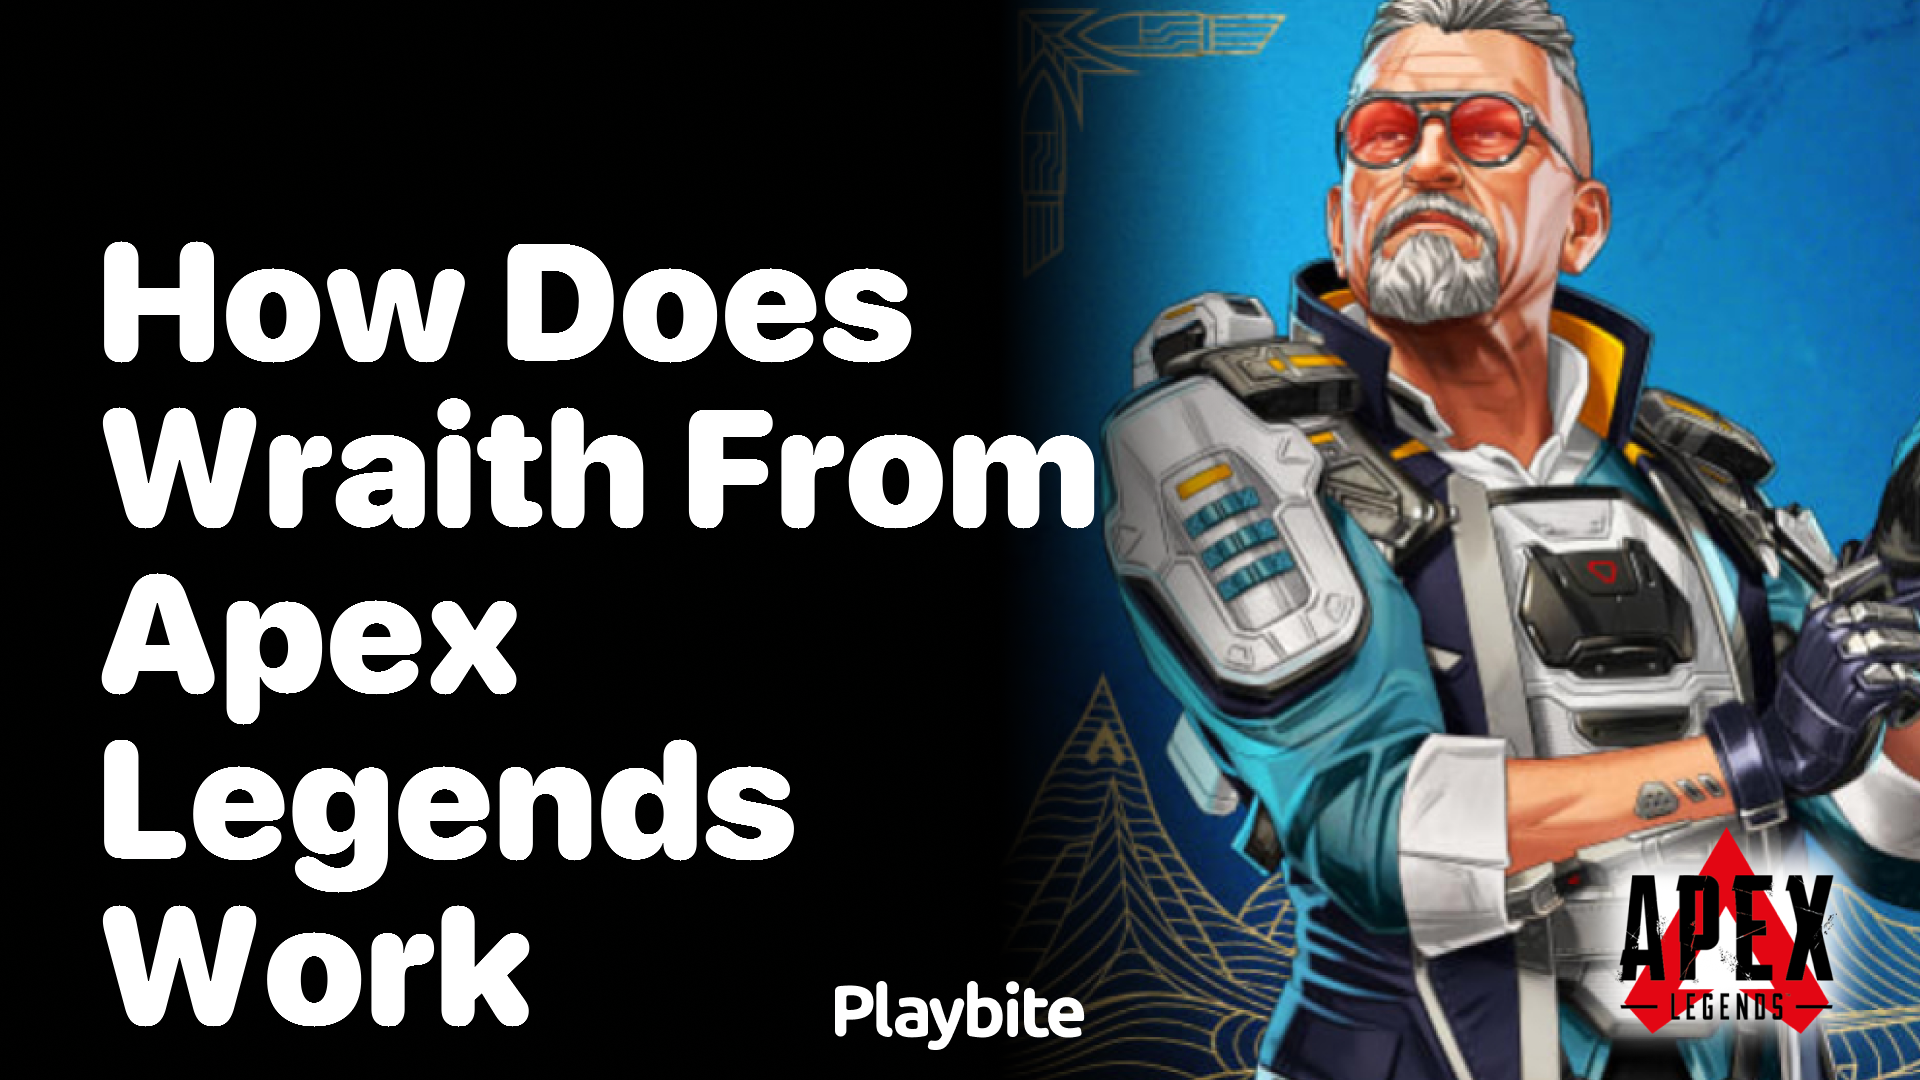 How does Wraith from Apex Legends work?